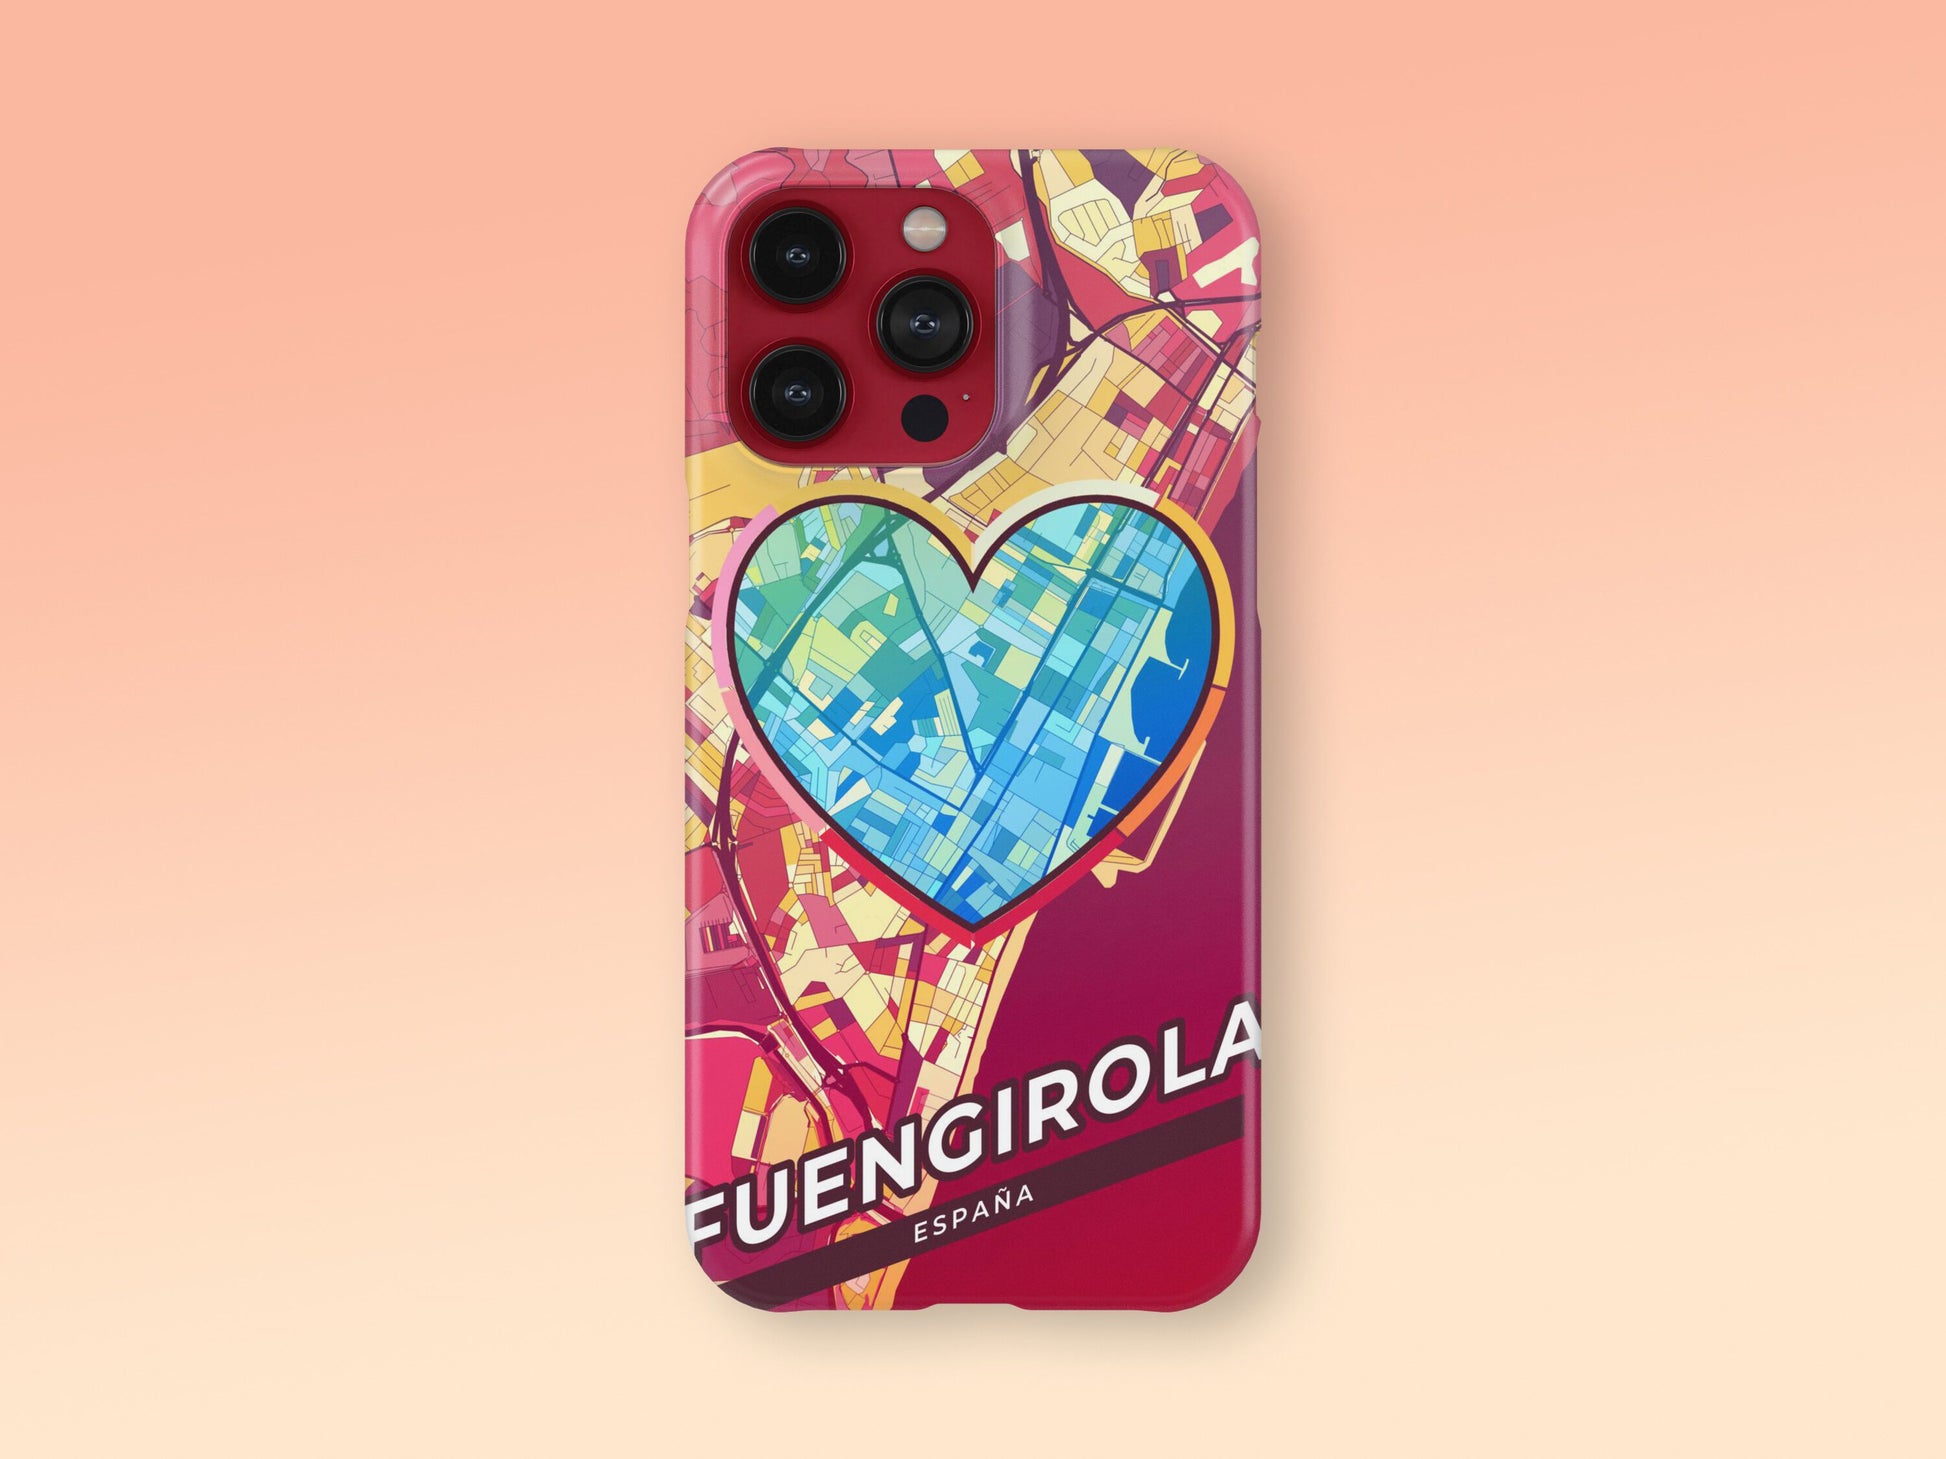 Fuengirola Spain slim phone case with colorful icon. Birthday, wedding or housewarming gift. Couple match cases. 2